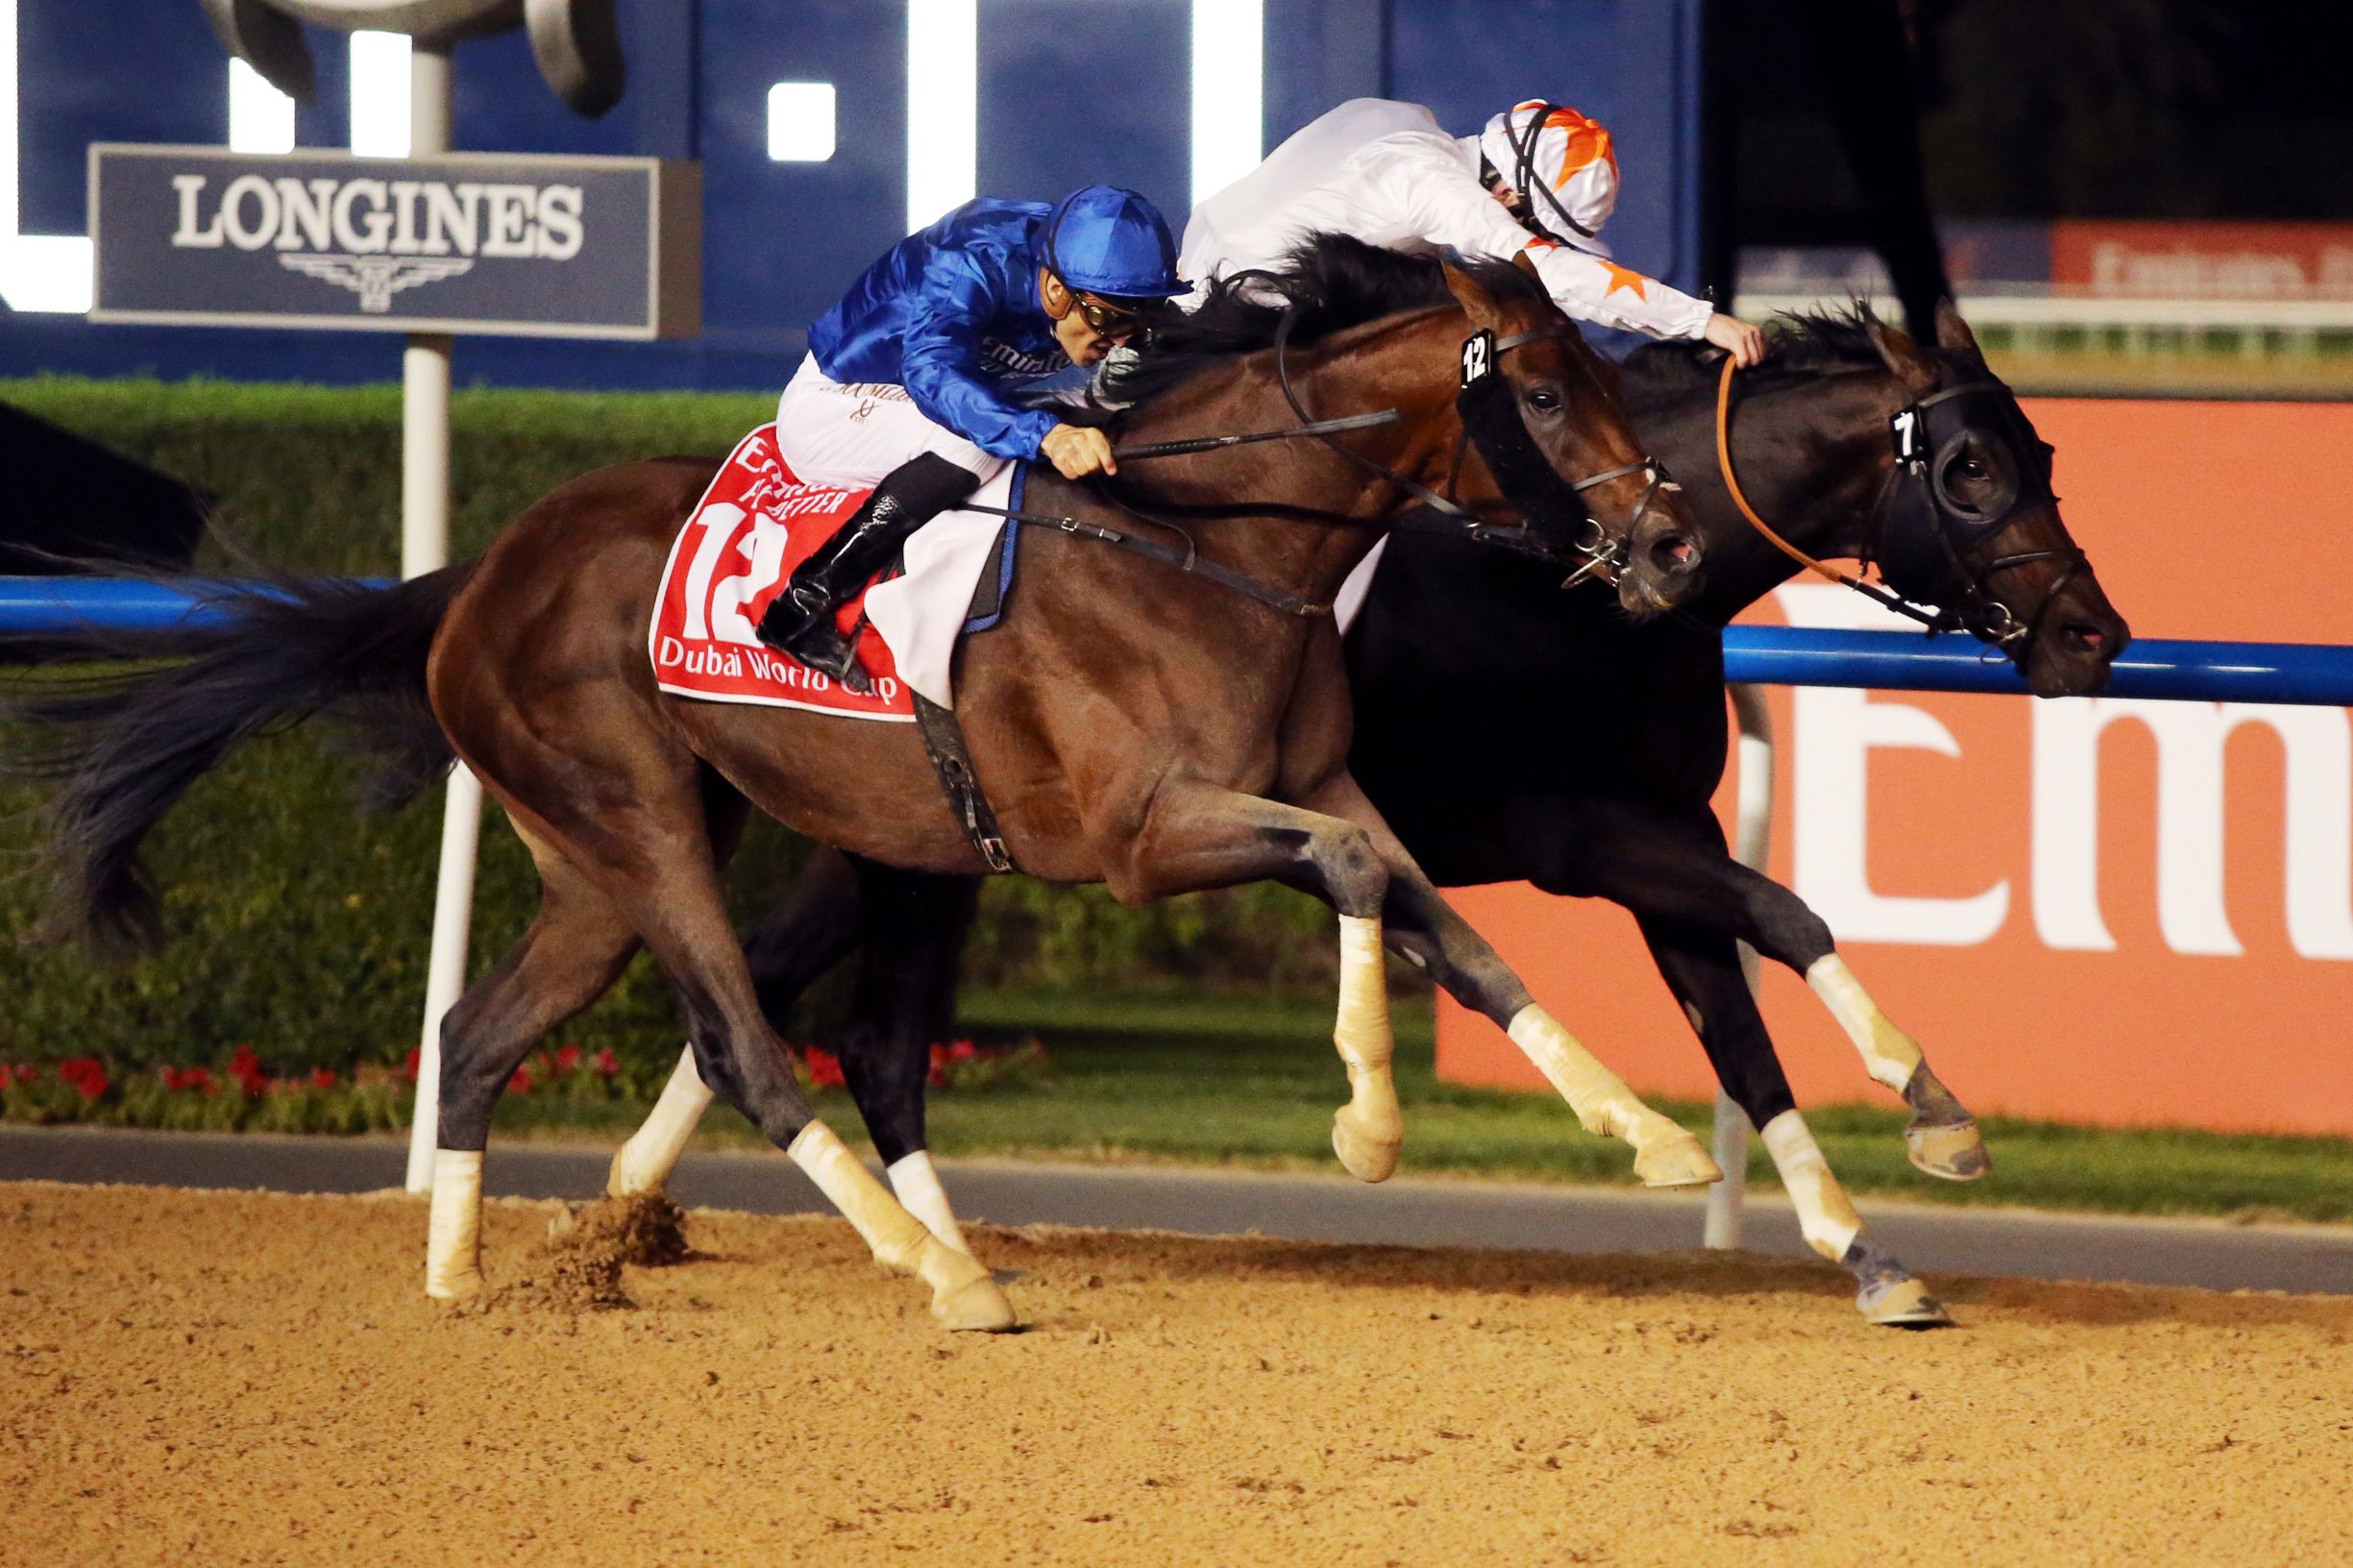 Thunder Snow and Gronkowski fight out the finish in the Group One Dubai World Cup